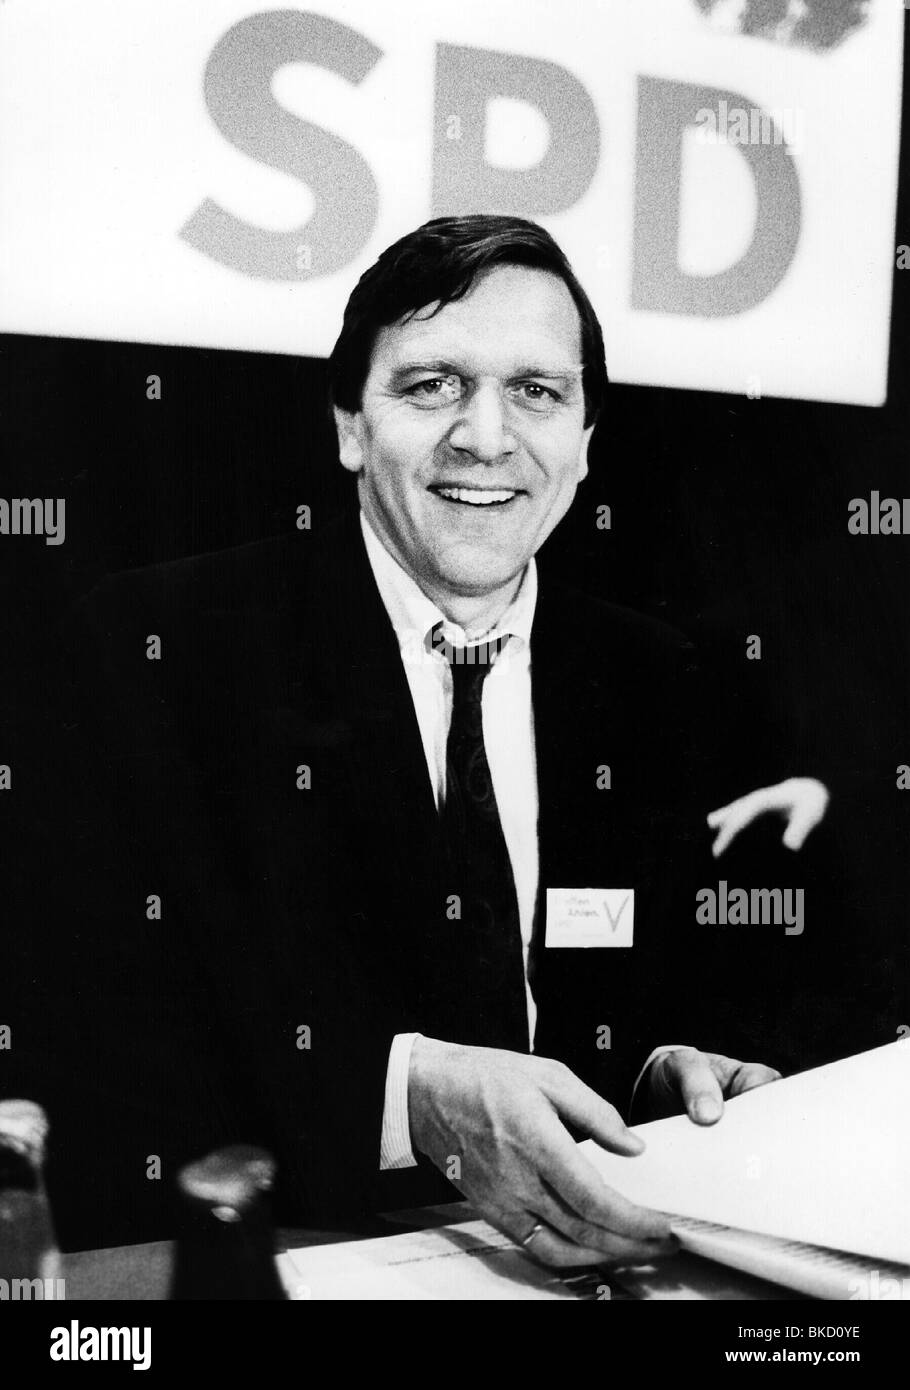 Schroeder, Gerhard, * 7.4.1944, German politician (SPD), portrait, as top candidate for Lower Saxony, 1986, Stock Photo